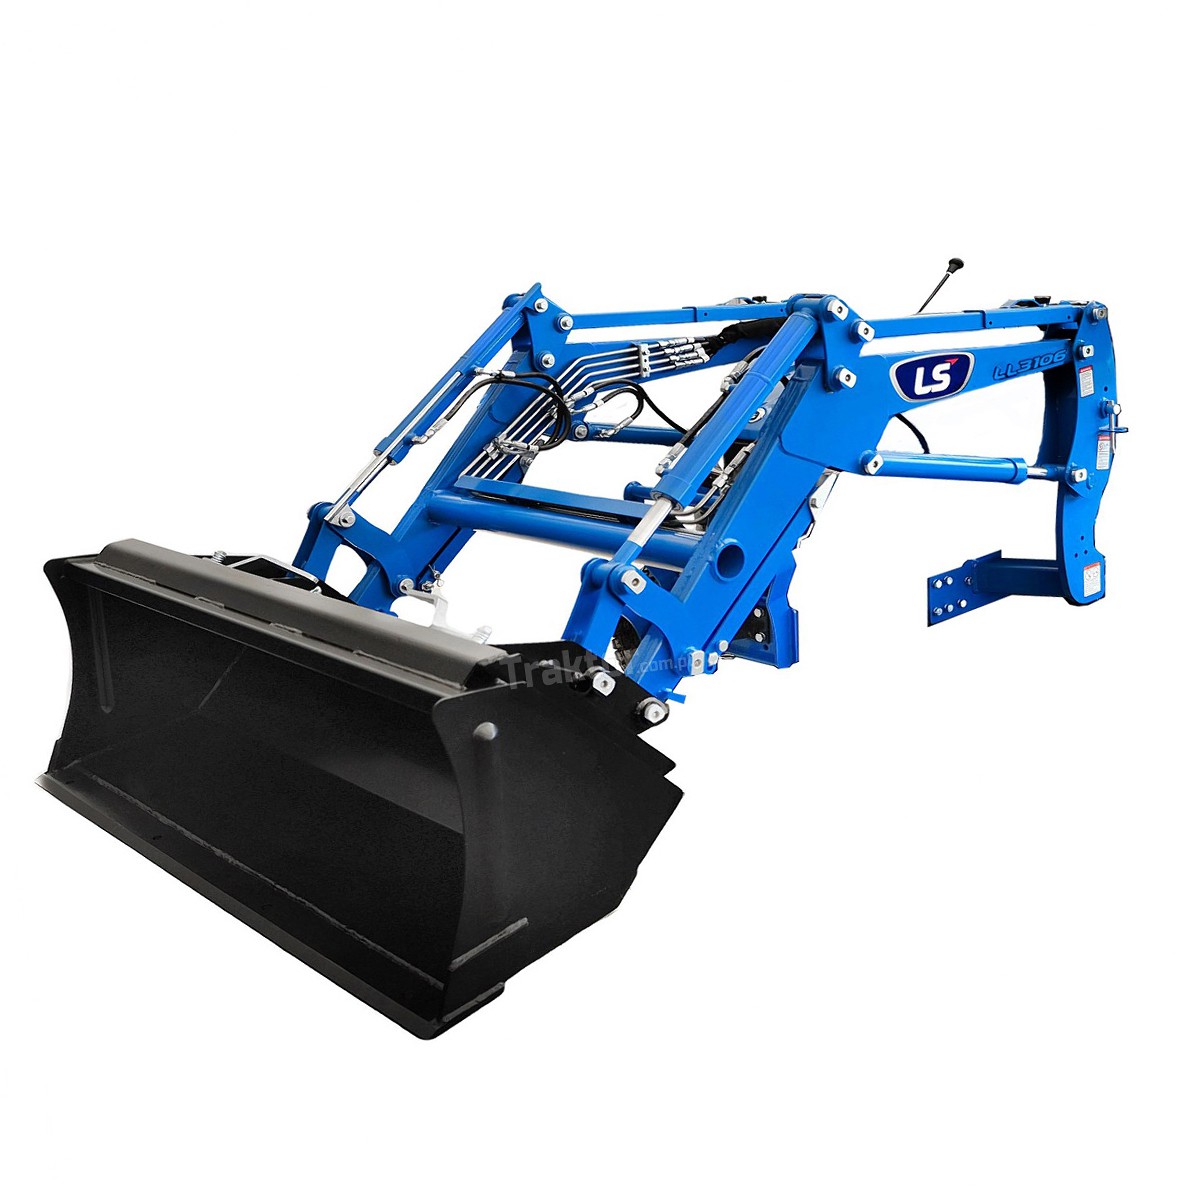 Frontlader TUR / New Holland Boomer 35 / New Holland Boomer 40 / 340TL